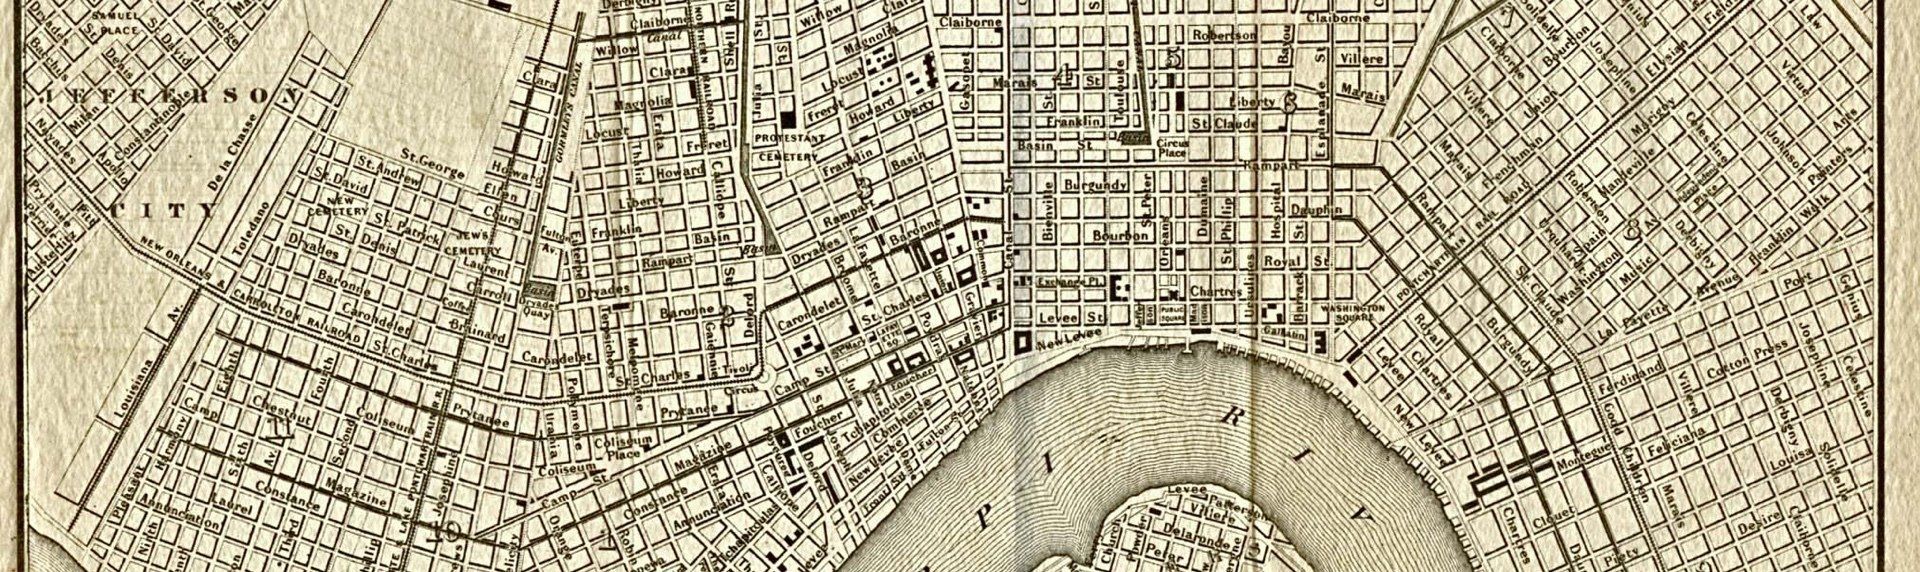 1876 map of New Orleans